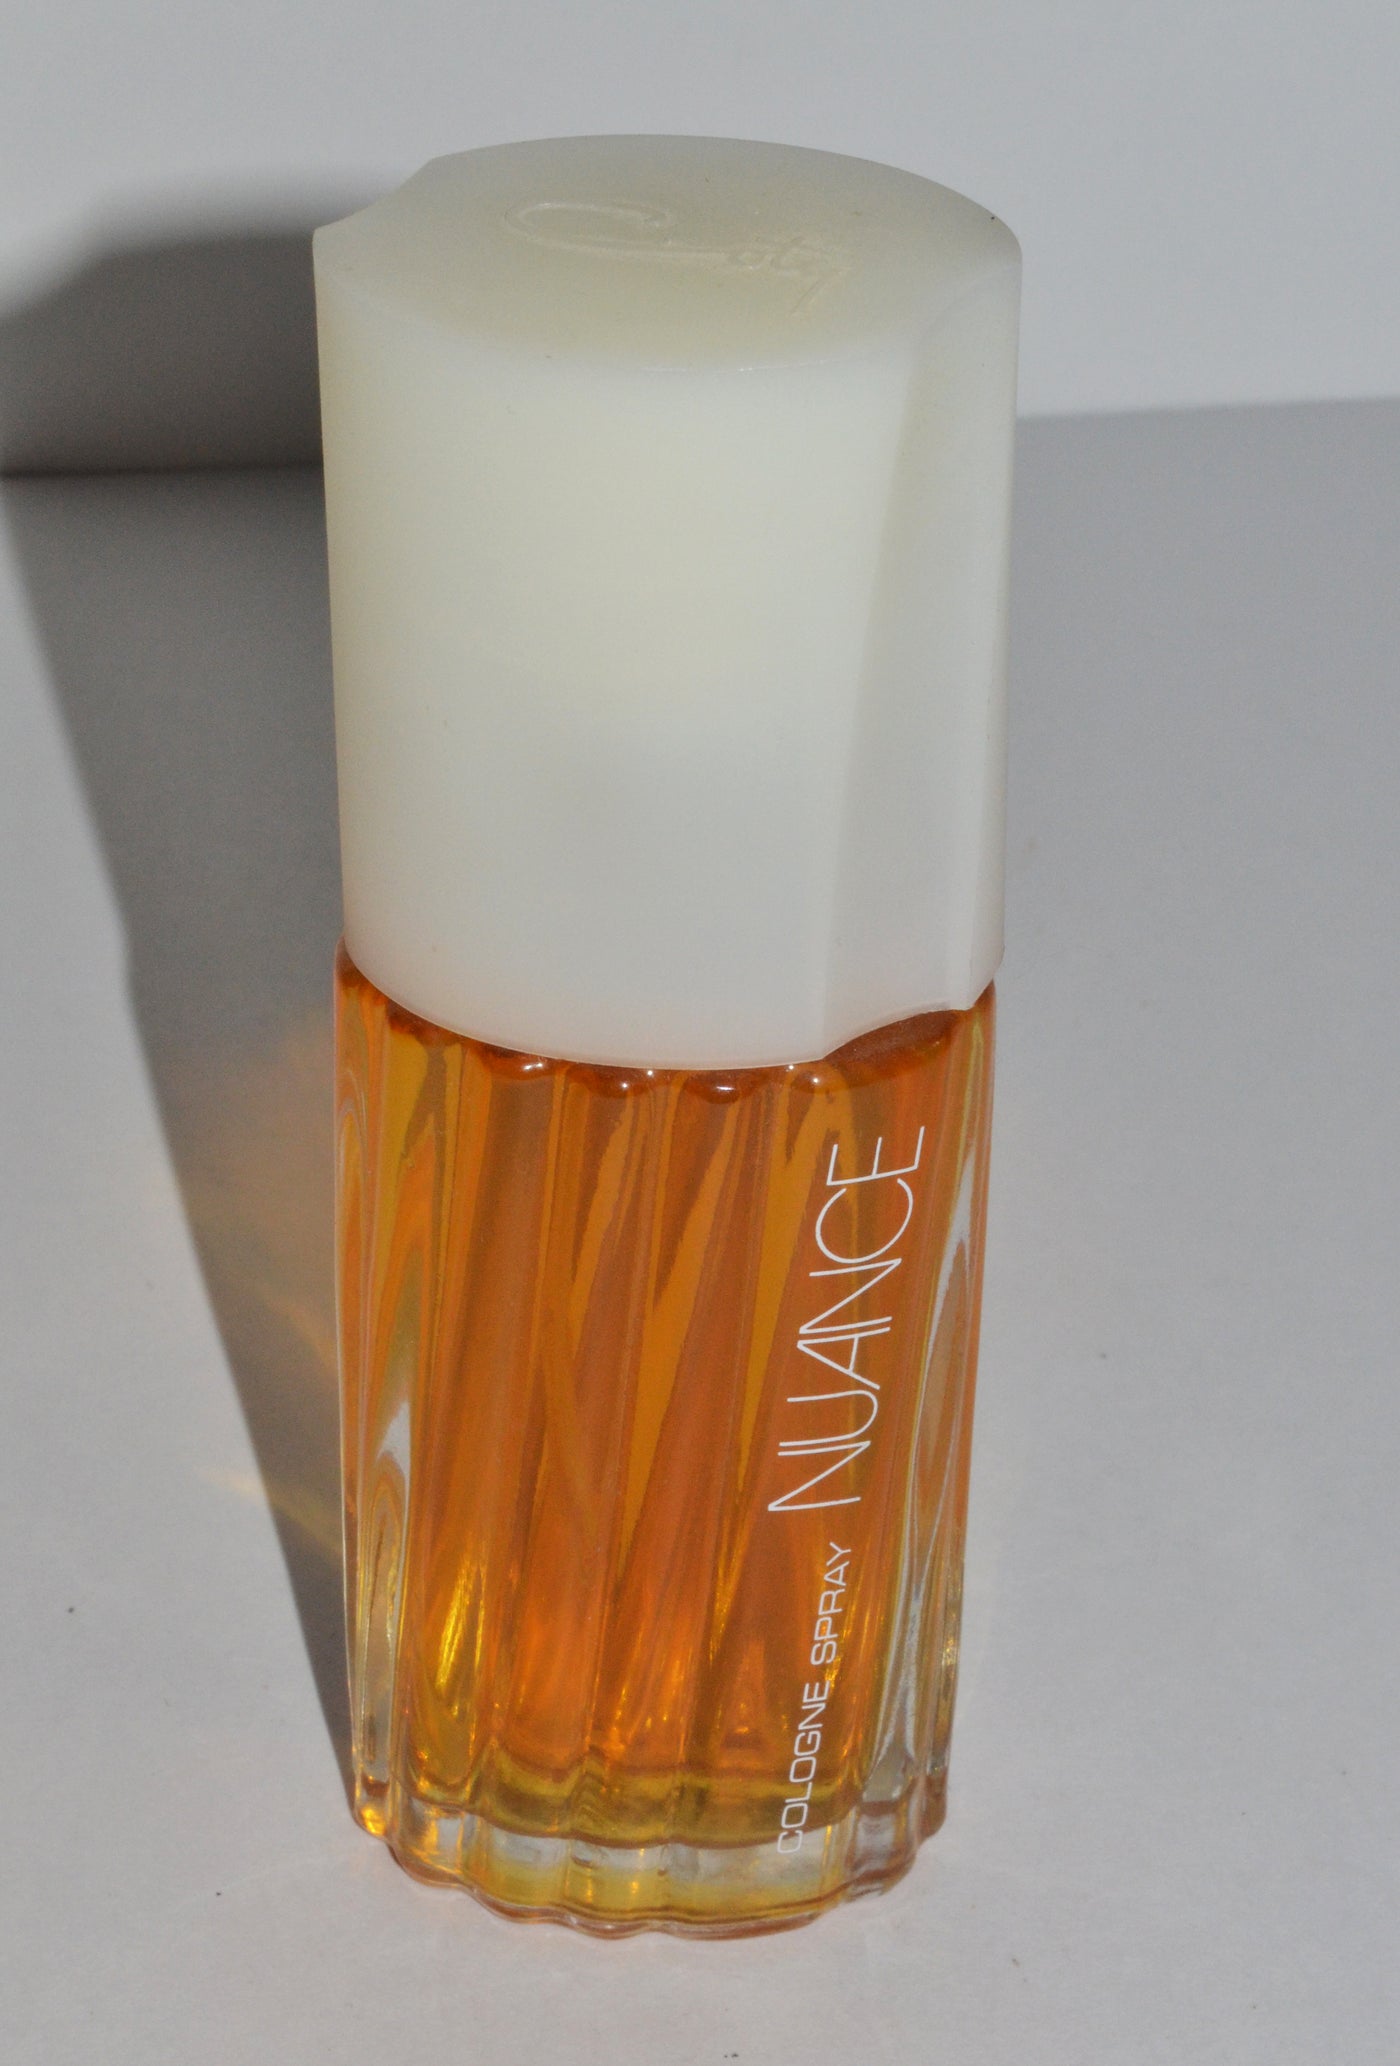 Nuance Cologne Spray By Coty